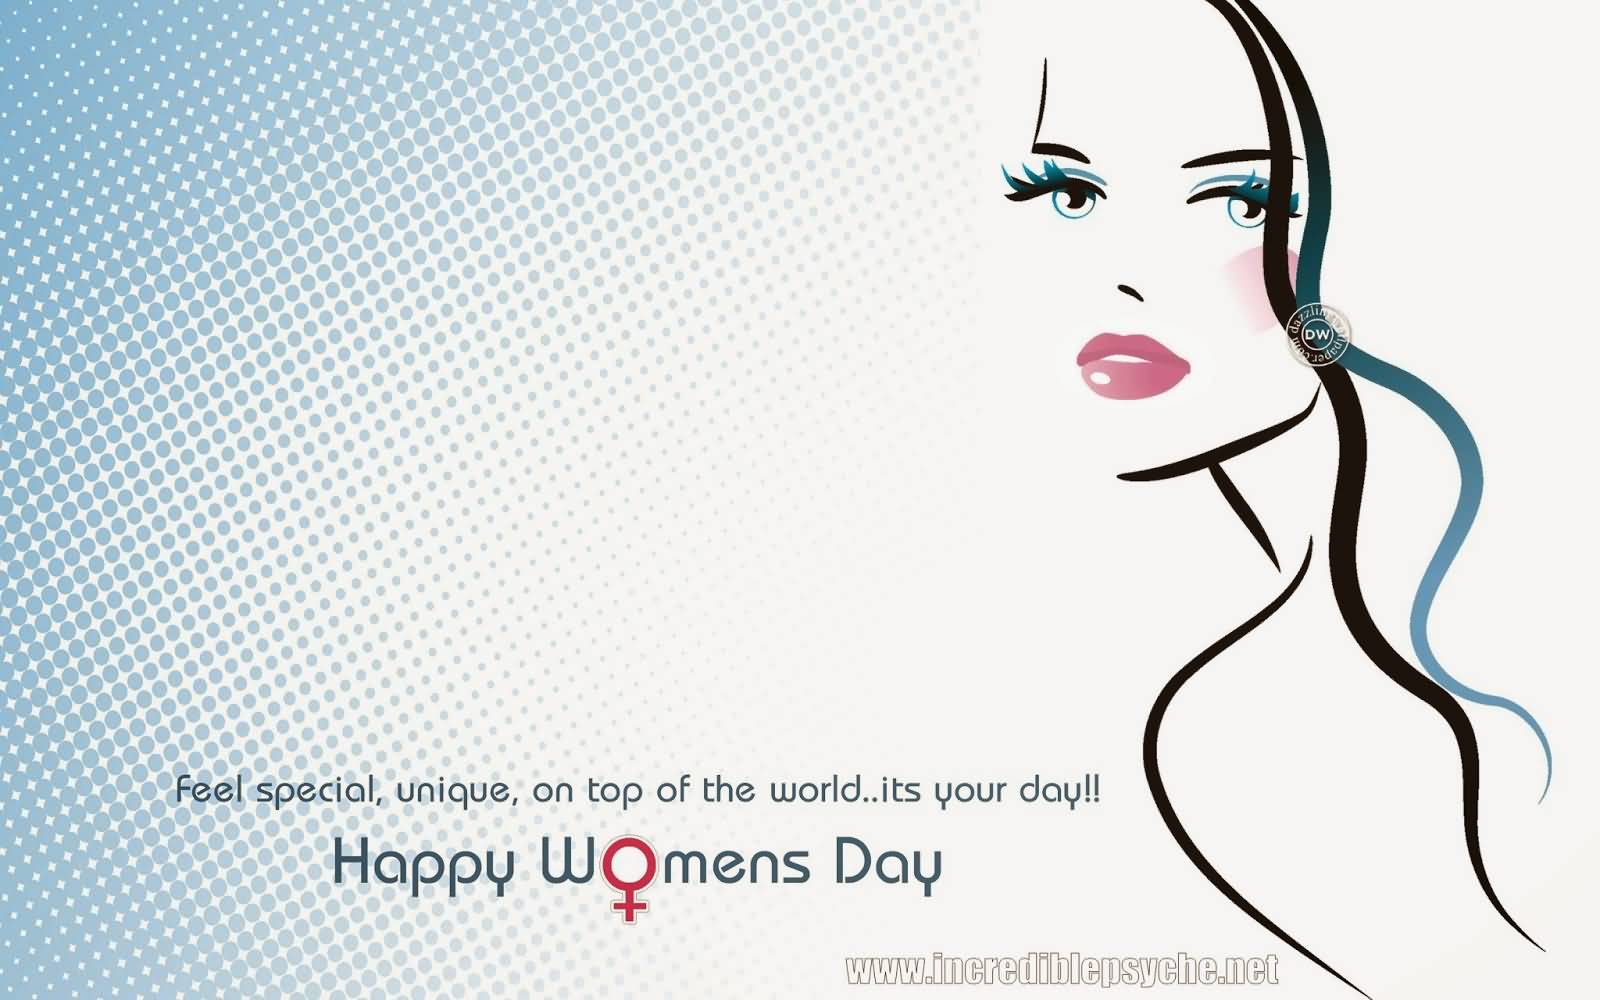 Feel Special, Unique, On Top Of The World, It's Your Day Happy Women's Day Greeting Card